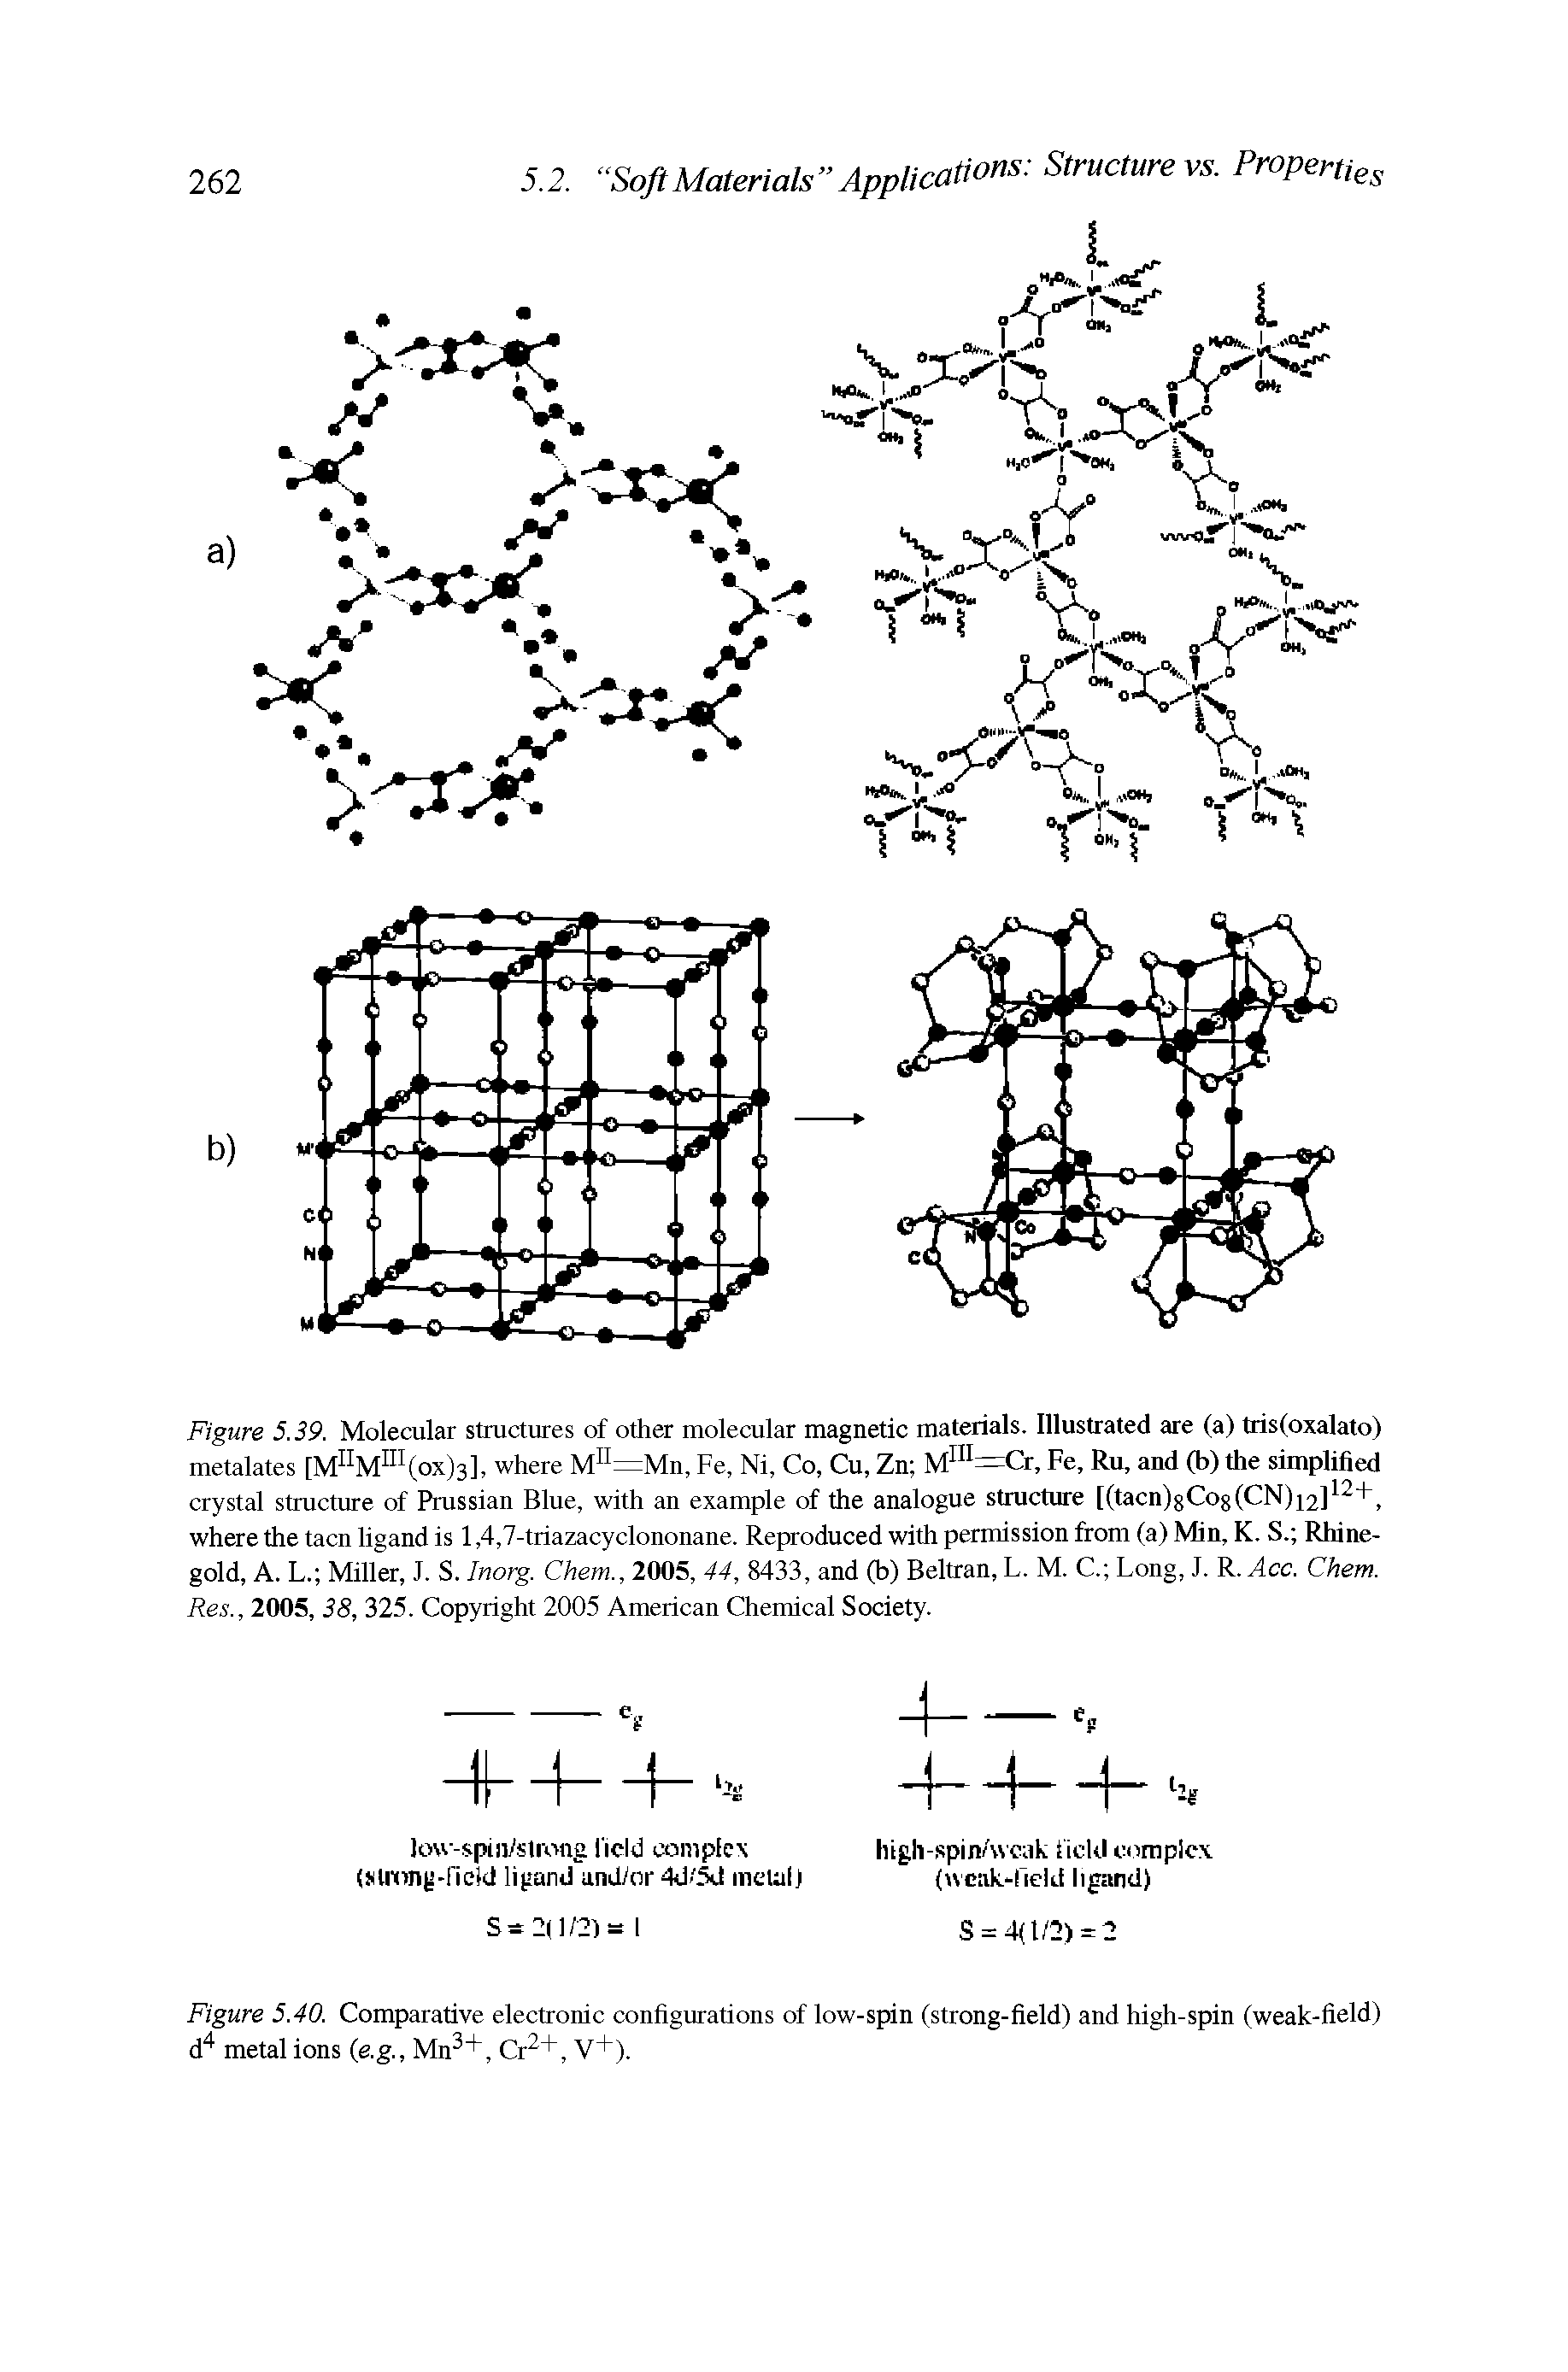 Figure 5.39. Molecular structures of other molecular magnetic materials. Illustrated are (a) tris(oxalato) metalates [M M (ox)3], where M I=Mn, Fe, Ni, Co, Cu, Zn M =Cr, Fe, Ru, and (b) the simplified crystal structure of Prussian Blue, with an example of the analogue structure [(tacn)8Co8(CN)i2], where the tacn ligand is 1,4,7-triazacyclononane. Reproduced with permission from (a) Min, K. S. Rhine-gold, A. L. Miller, J. S. Inorg. Chem., 2005, 44, 8433, and (b) Belttan, L. M. C. Long, J. R. Acc. Chem. Res., 2005, 38, 325. Copyright 2005 American Chemical Society.